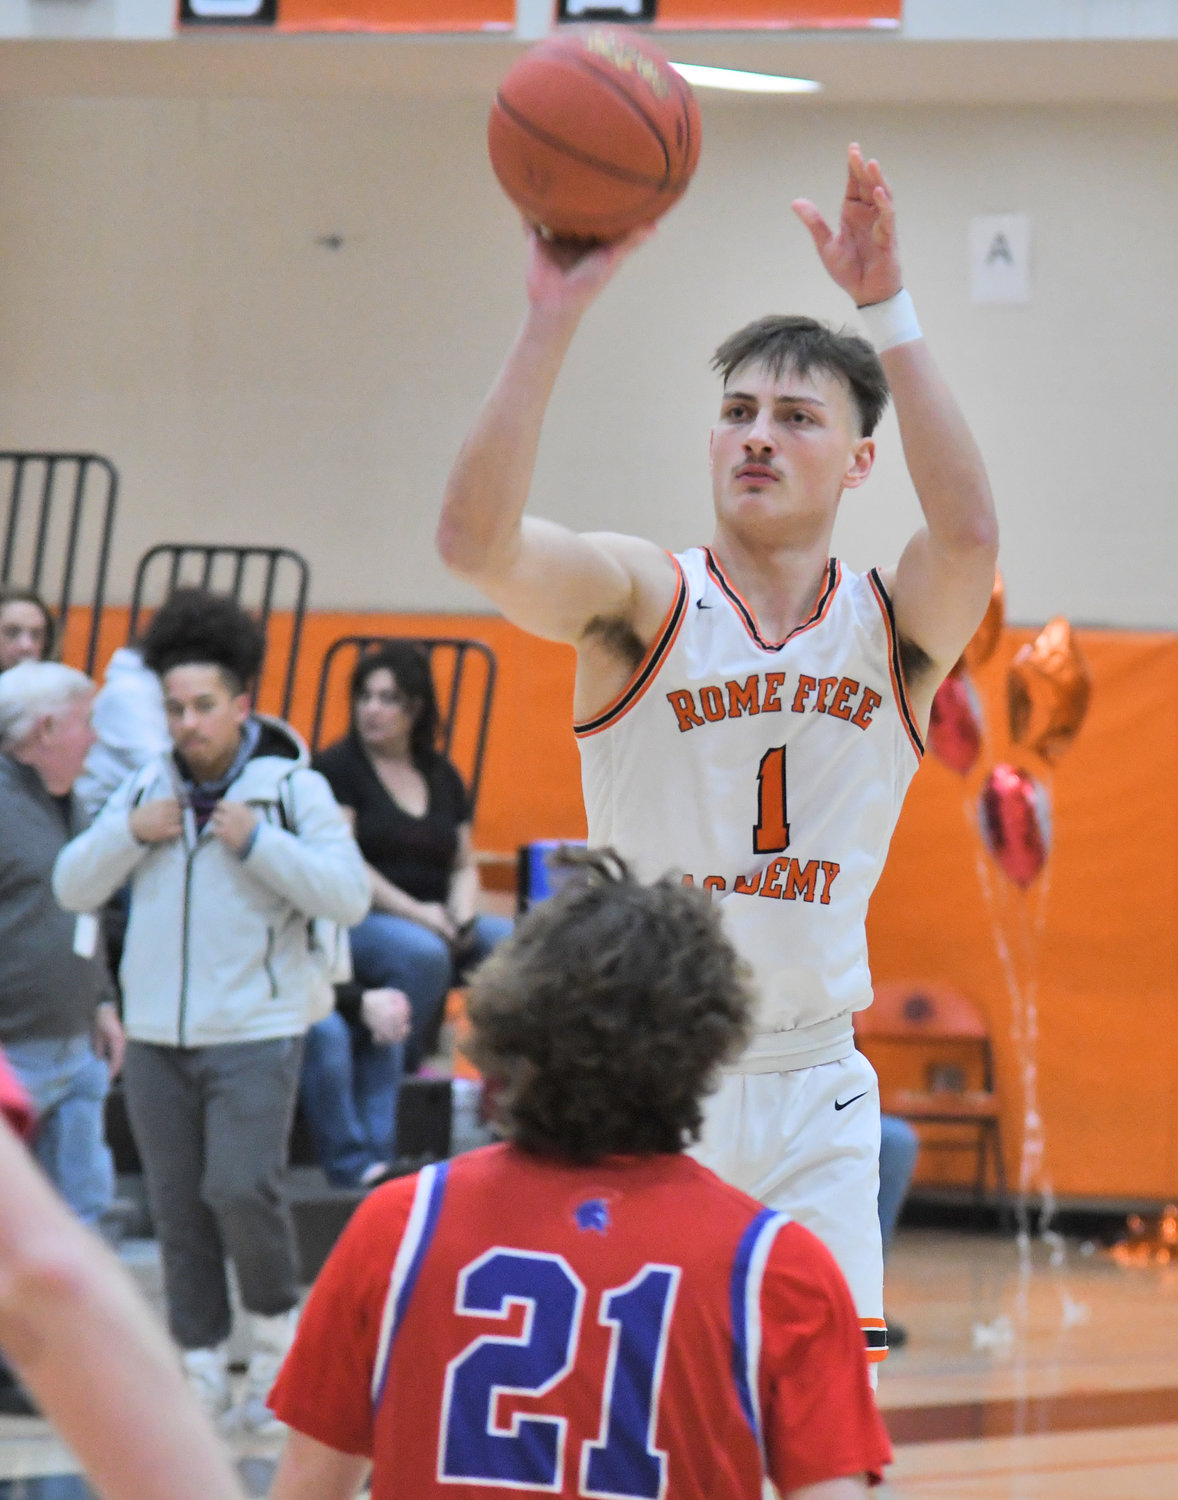 Rome Free Academy’s Jack Lawless shoots a three-pointer with New Hartford’s Dan MacTurk defending Tuesday night at RFA. Lawless had 12 points and nine rebounds in RFA’s 62-50 win.